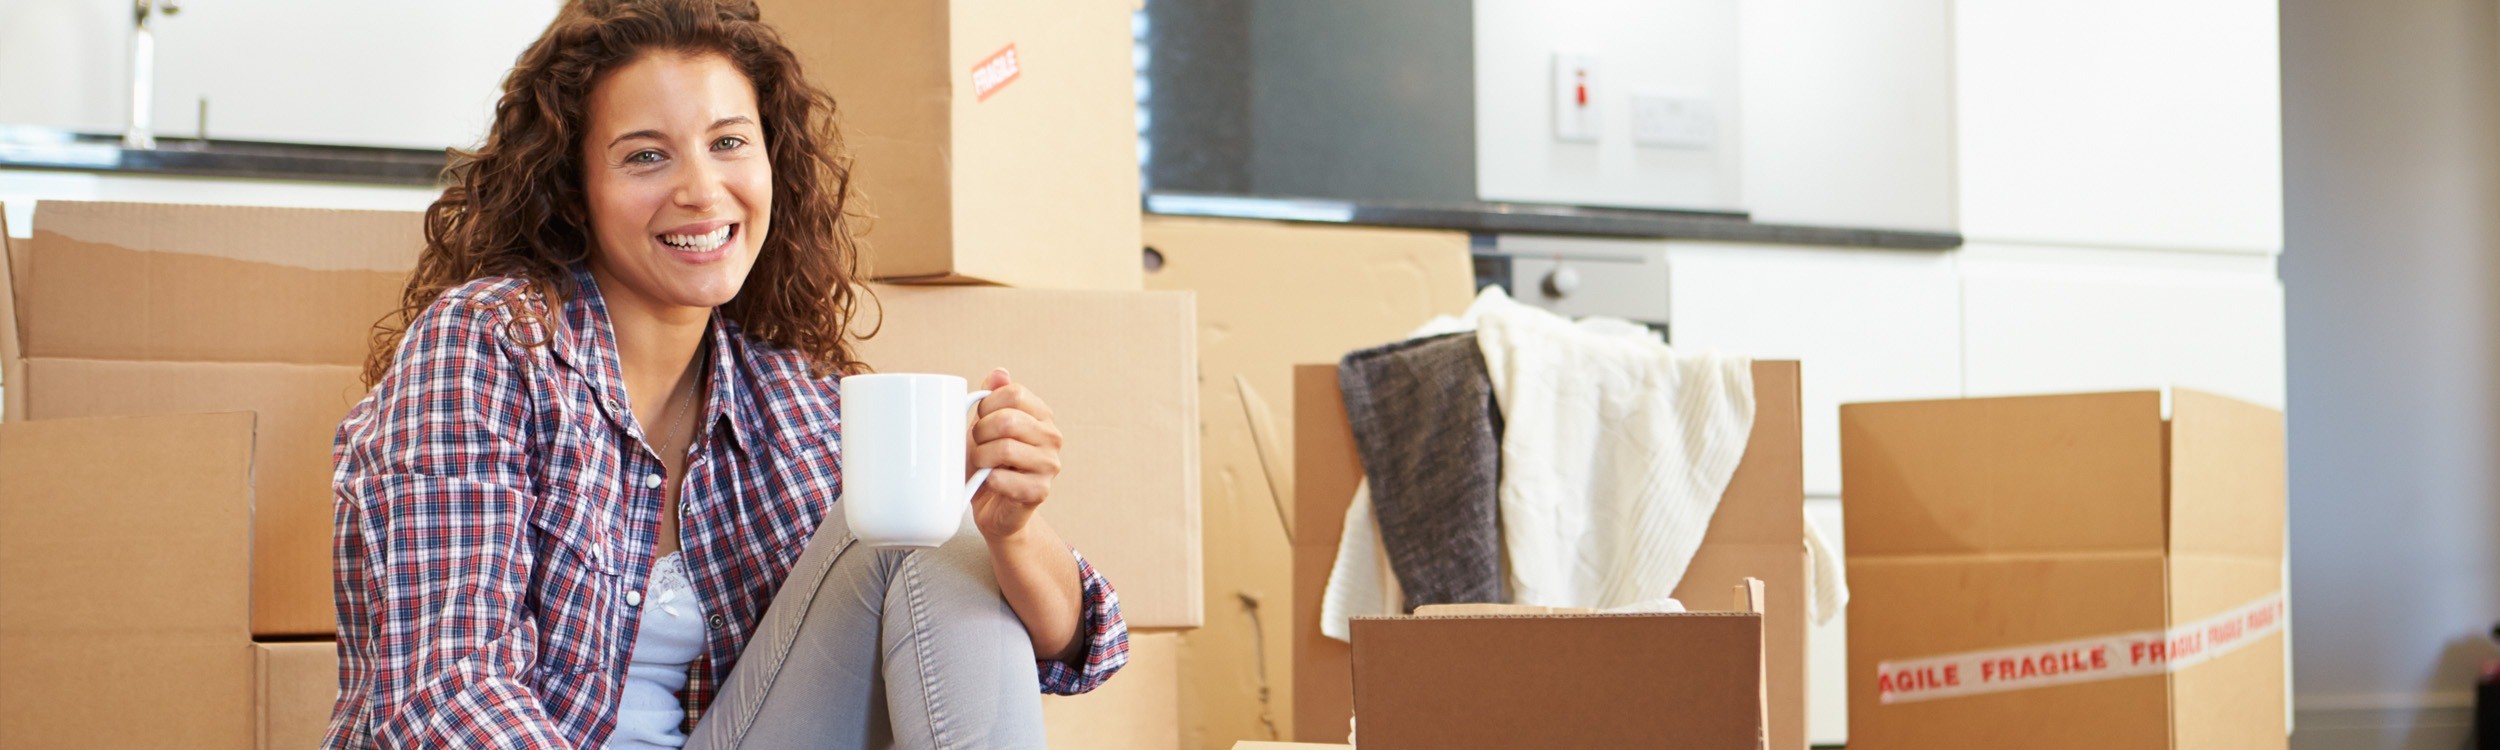 girl holding coffee sitting on floor with moving boxes